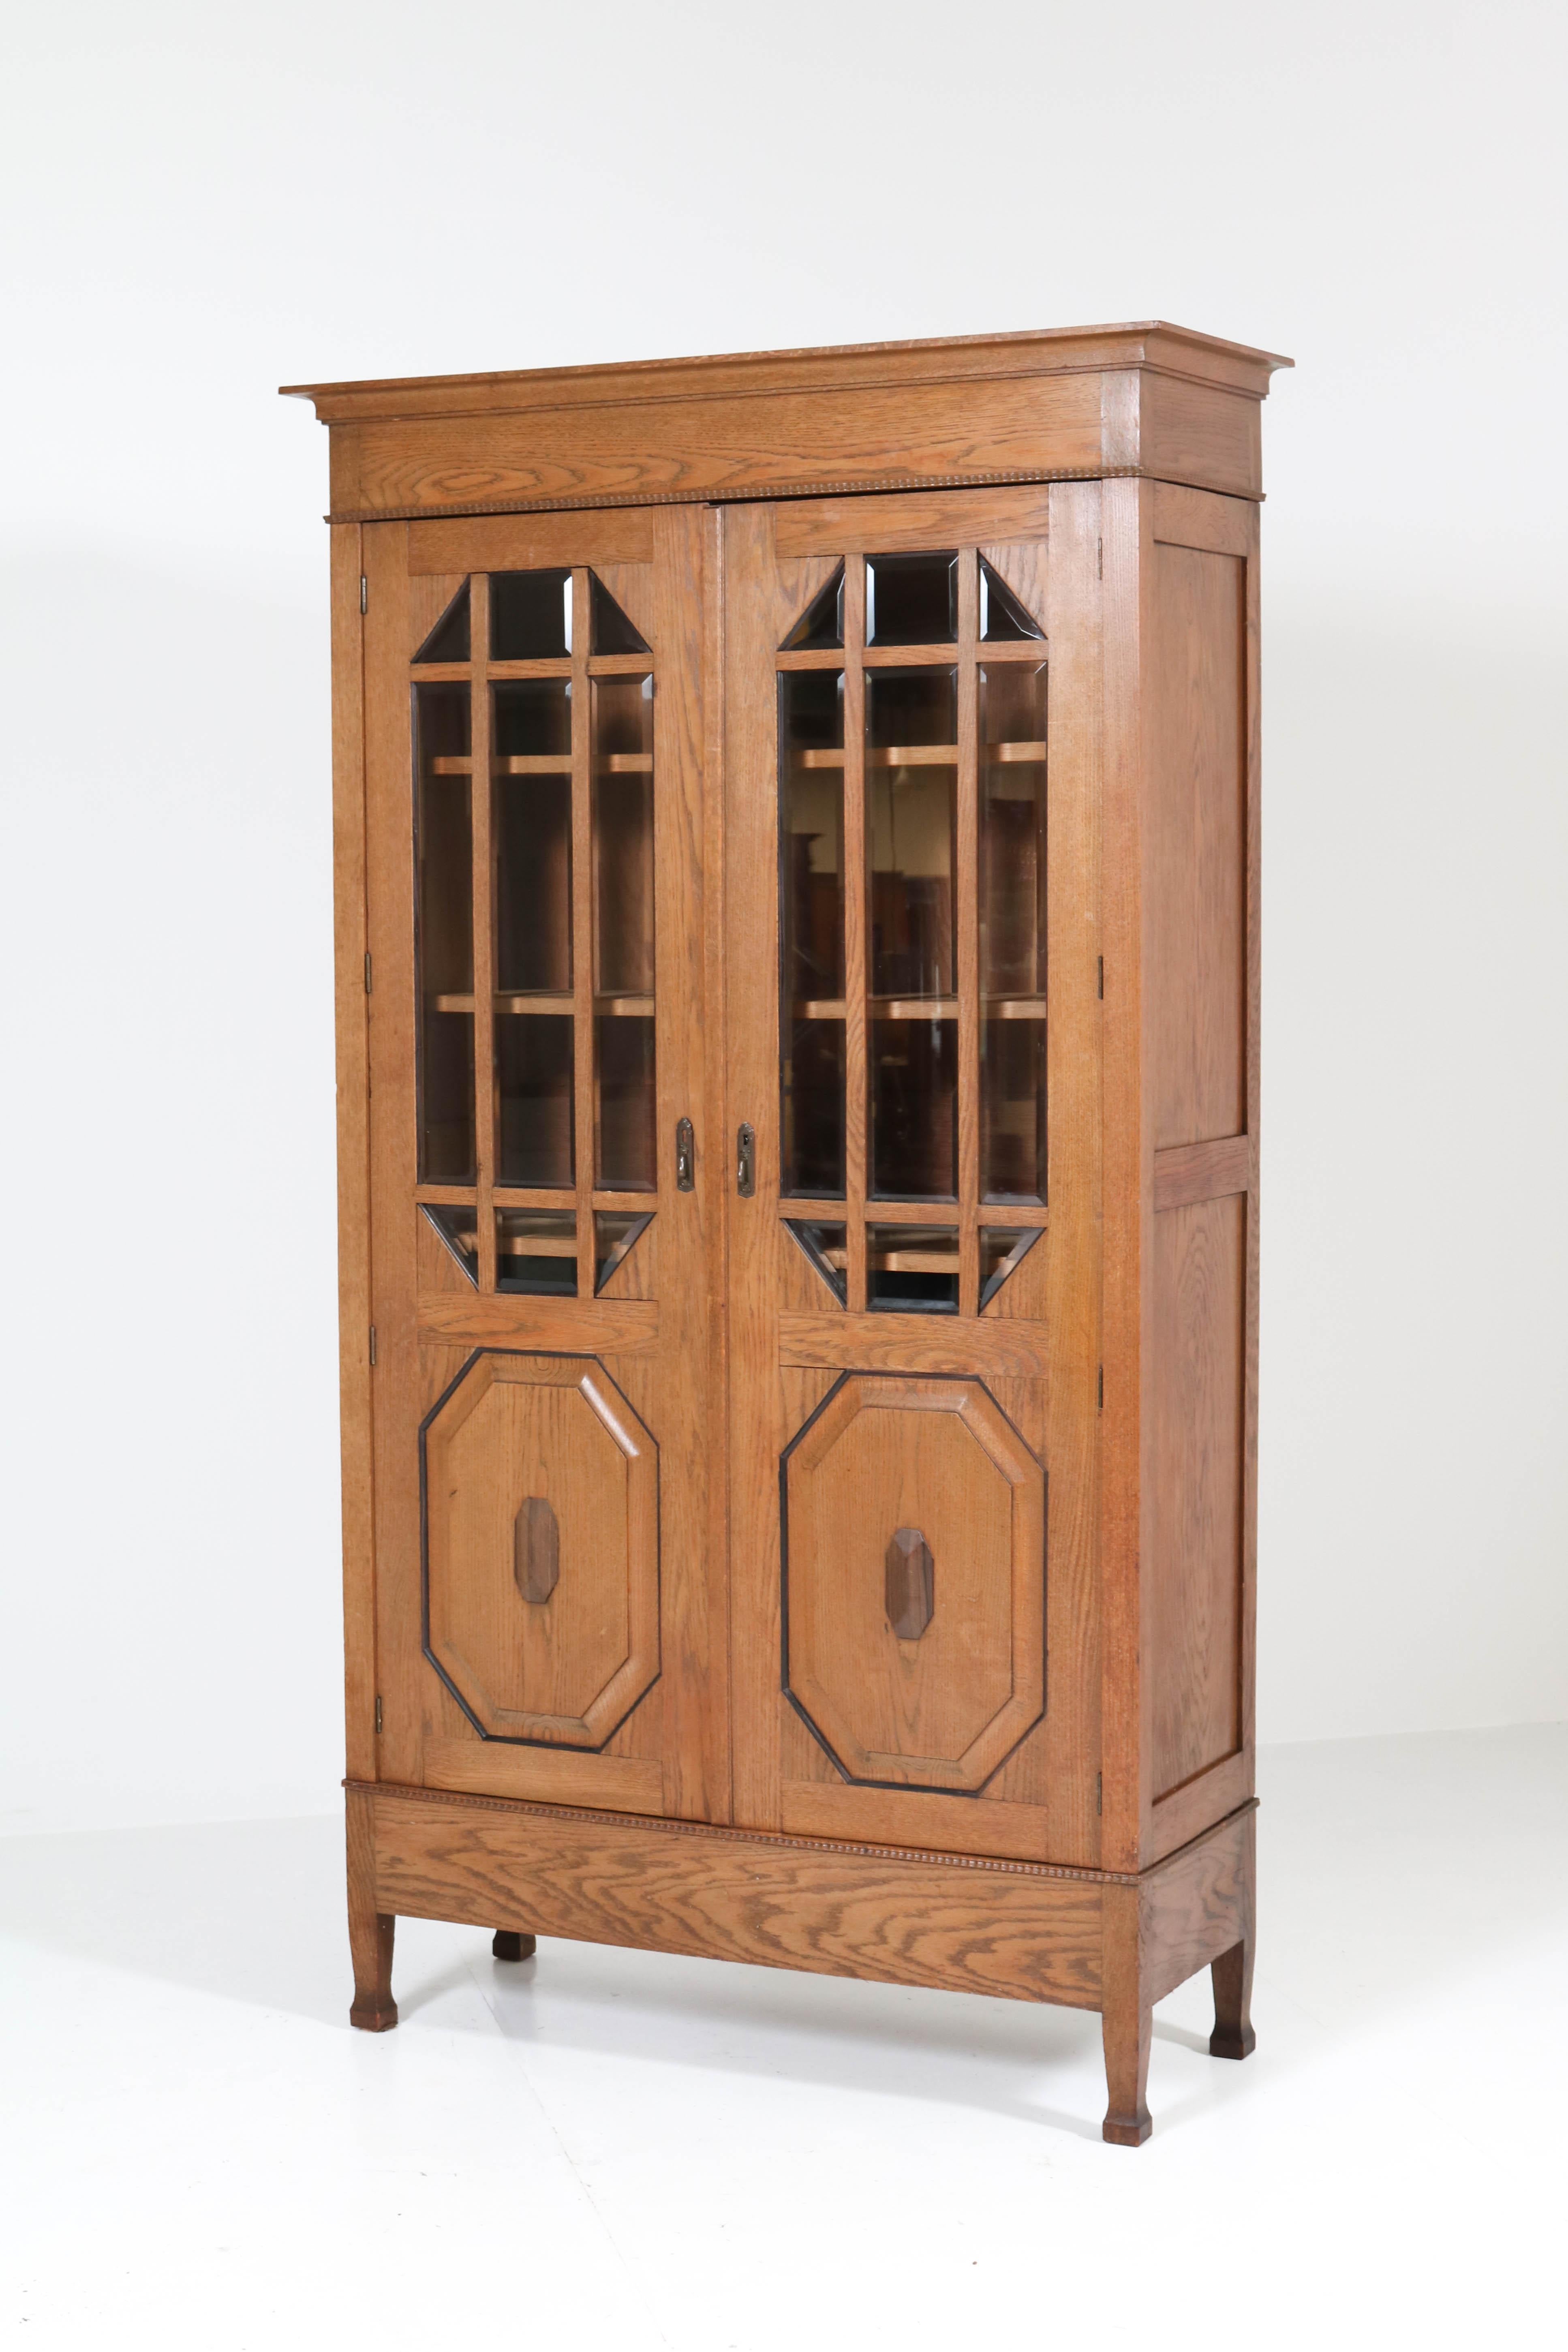 Wonderful and rare Art Nouveau Arts & Crafts bookcase.
Striking Dutch design from the 1900s.
Solid oak with ebony Macassar lining and decoration.
The doors have eighteen original beveled glass pieces.
Four original solid oak shelves, adjustable